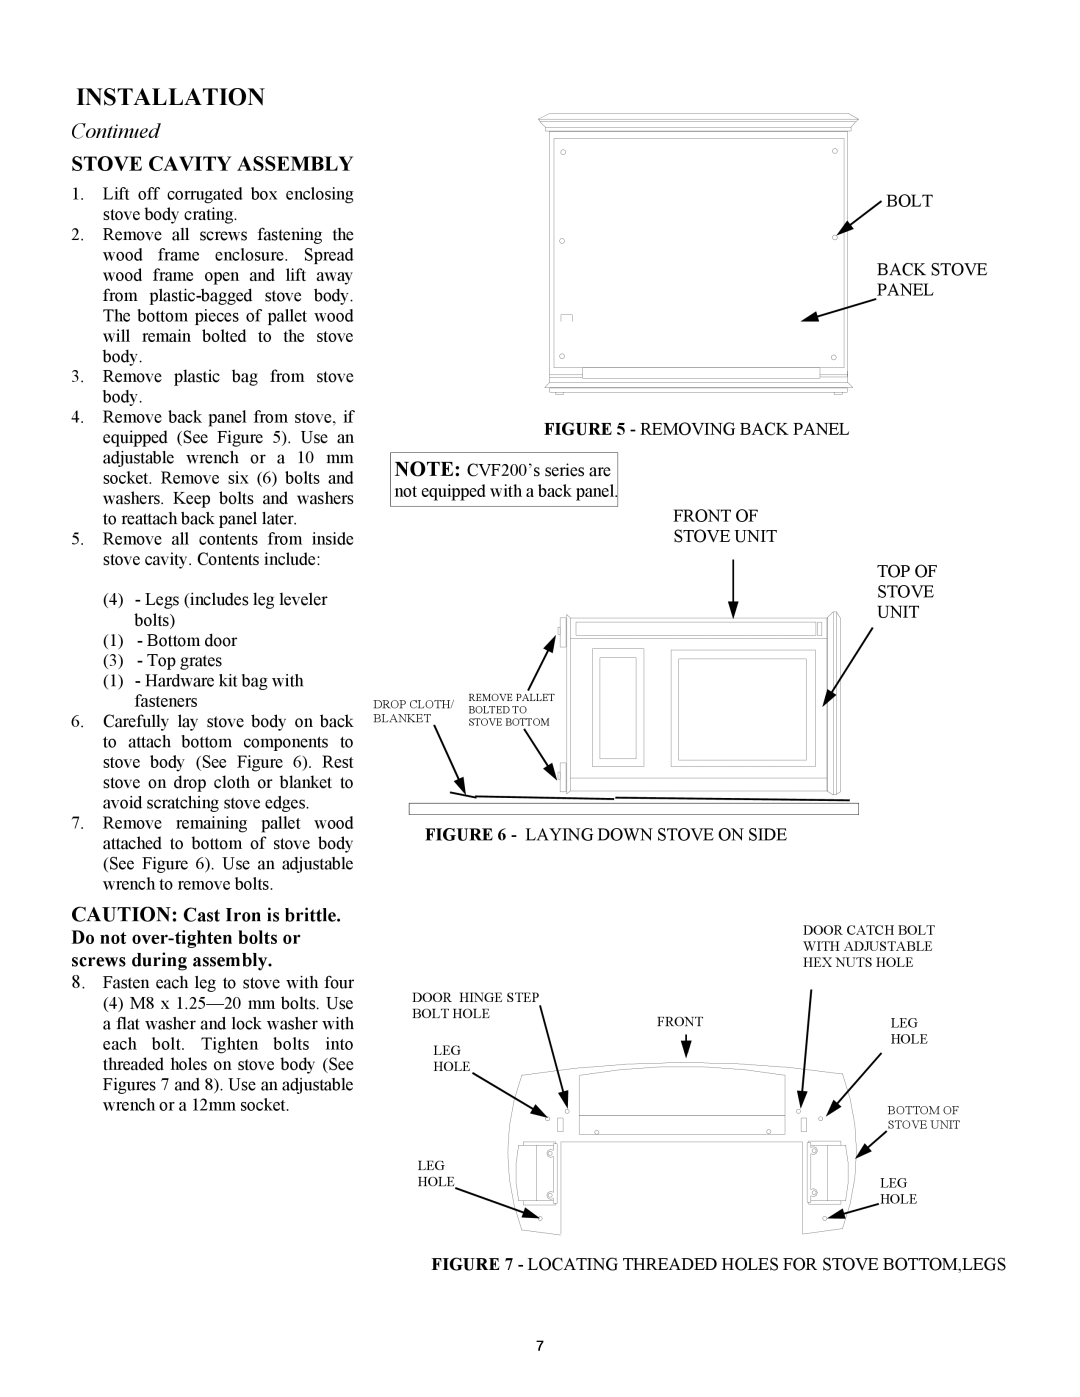 New Buck Corporation GAS STOVE HEATER installation manual Continued, Stove Cavity Assembly 